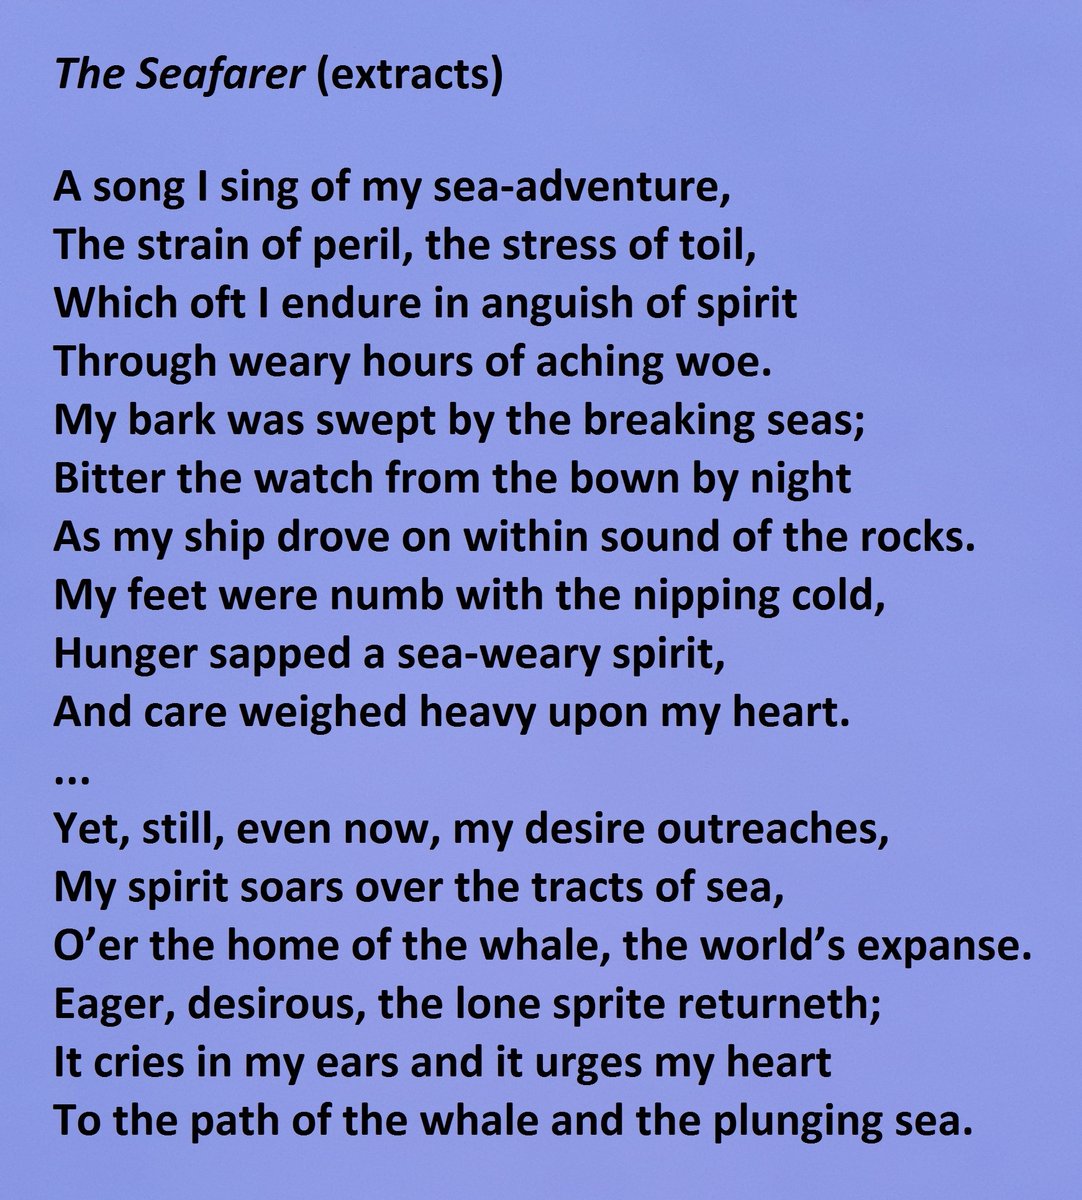 "The Seafarer" - Extract 1 beginning with "A song I sing of my sea-adventure" ending with "And care weighed heavy upon my heart." - Extract 2 beginning with "Yet, still, even now, my desire outreaches" ending with "To the path of the whale and the plunging sea." 